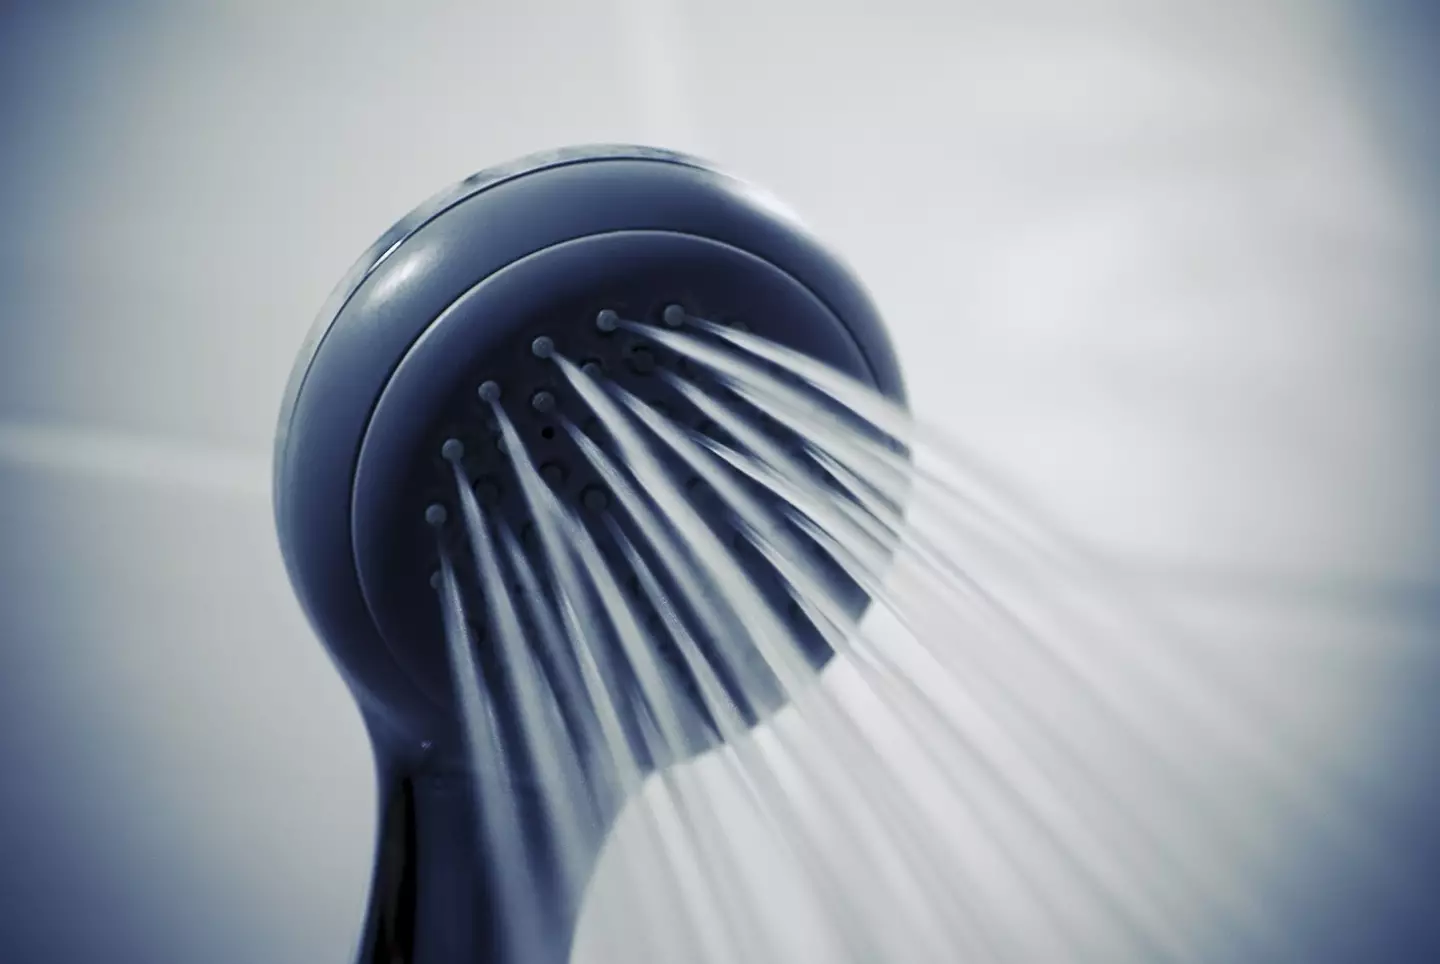 Showering at night has been found to help you get a better night's sleep.